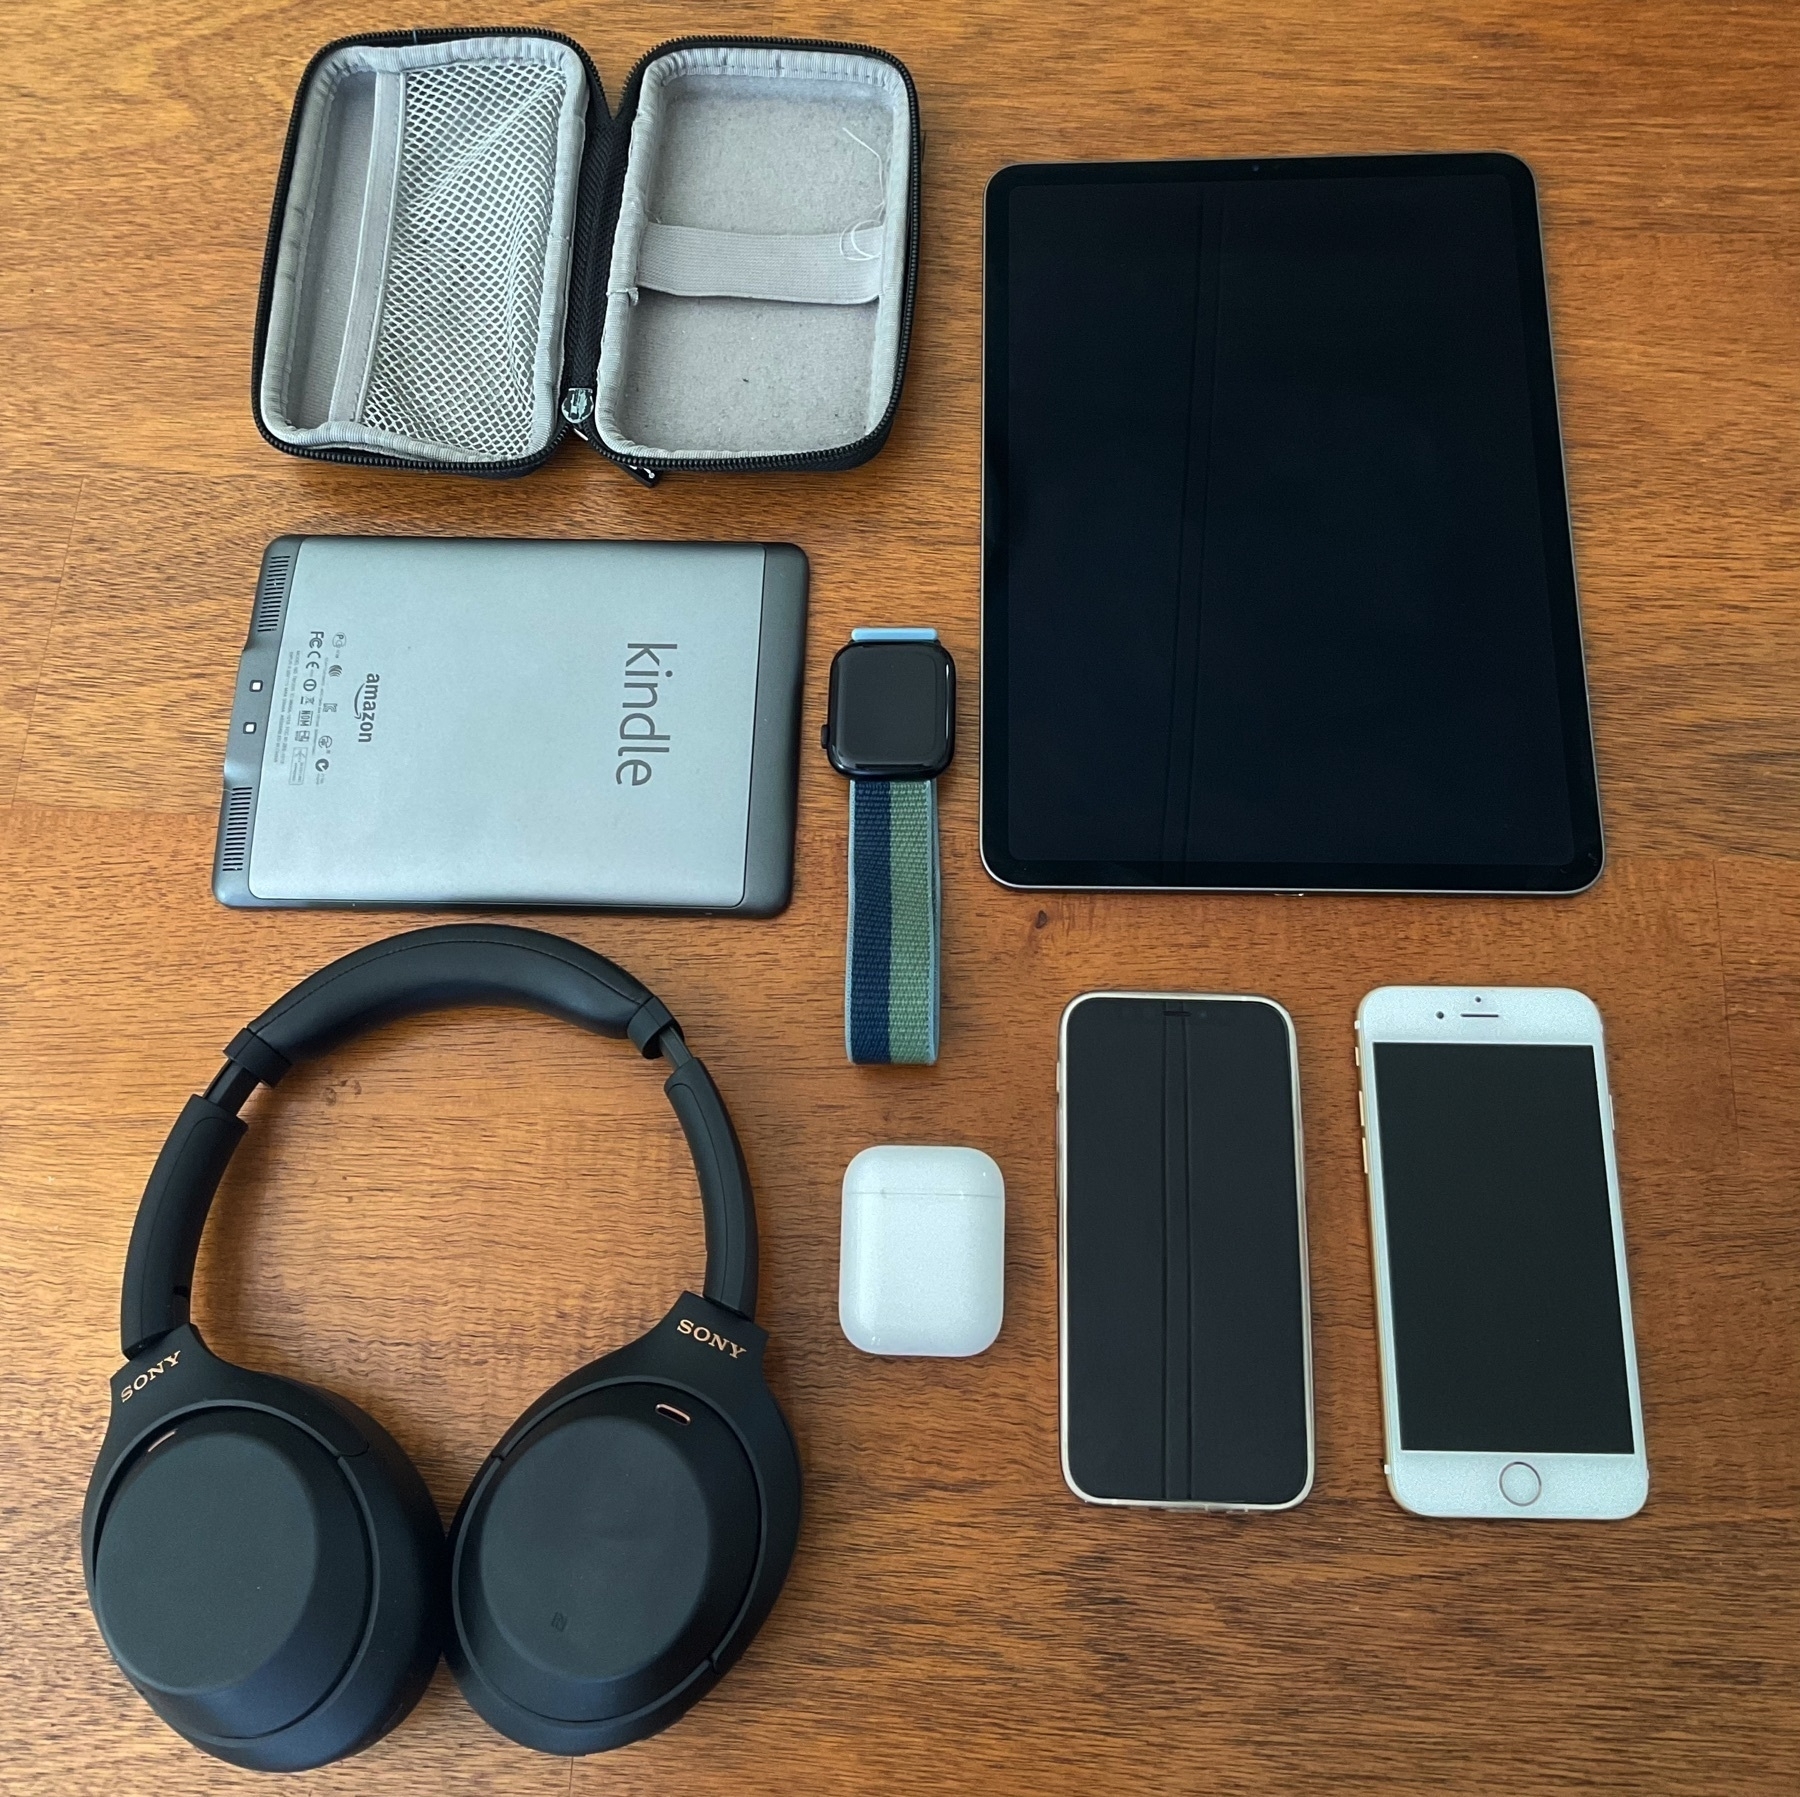 A layout of the gadgets we normally take on trips, laid out in a grid on a table: An iPad, 2 iPhones, a pair of Airpods, a pair of headphones, a kindle and an Apple Watch.